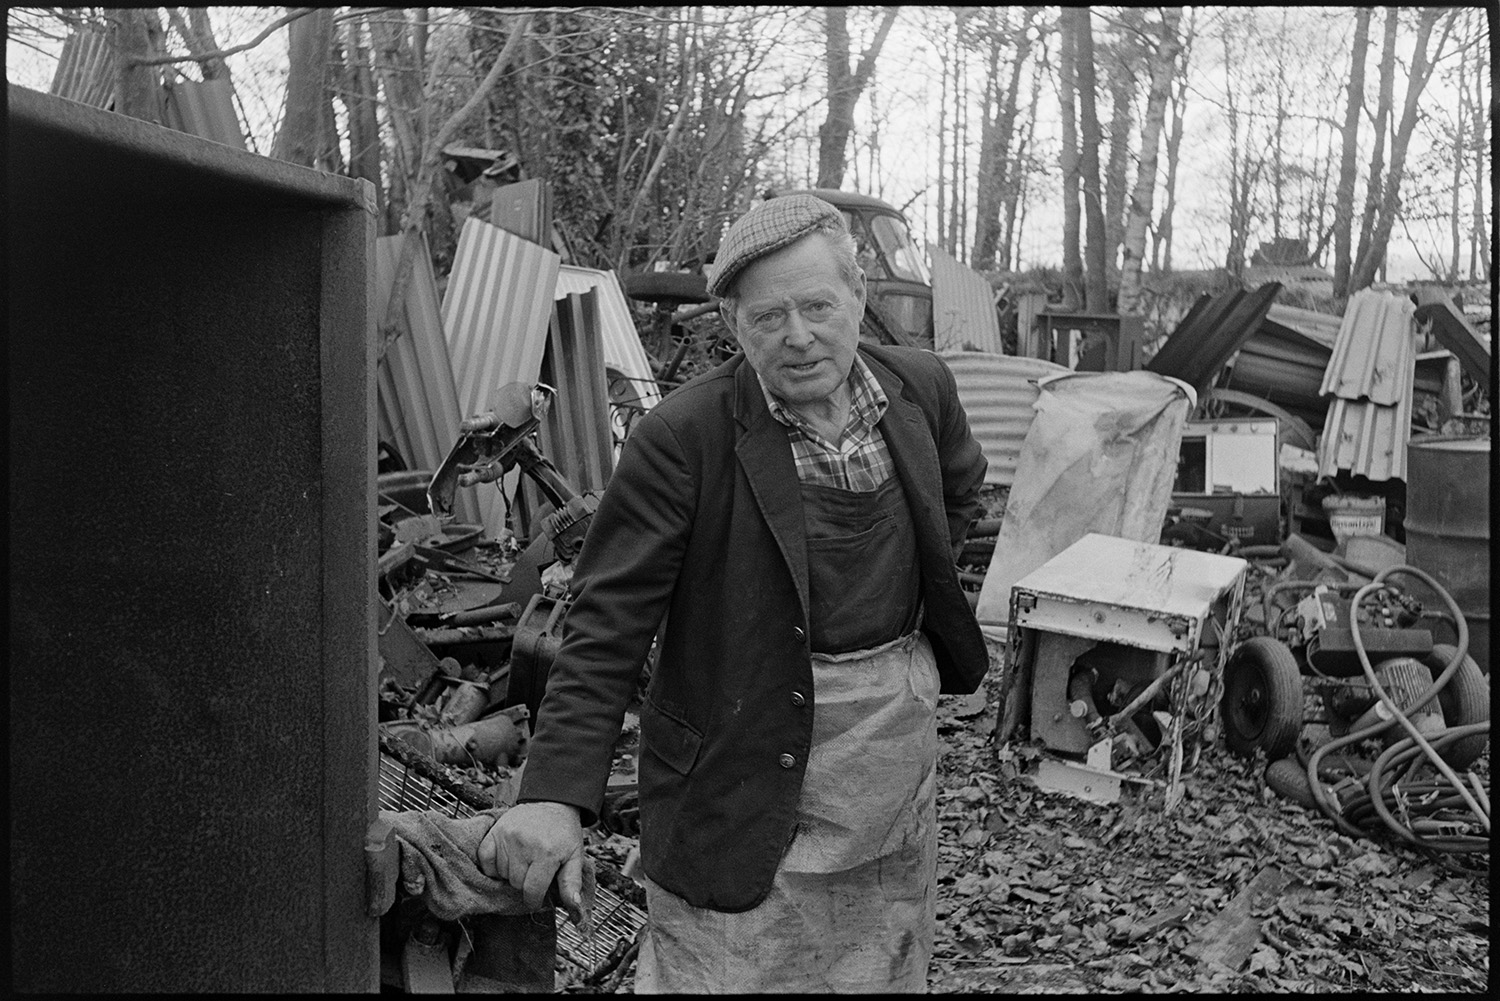 Scrap metal merchant working in his yard, chatting to photographer. 
[Jimmy Hughes in his scrap metal yard at Leigh Road, Chulmleigh, facing the camera. Various items can be seen I the yard, including sheets of corrugated iron, old engine parts and an old washing machine.]